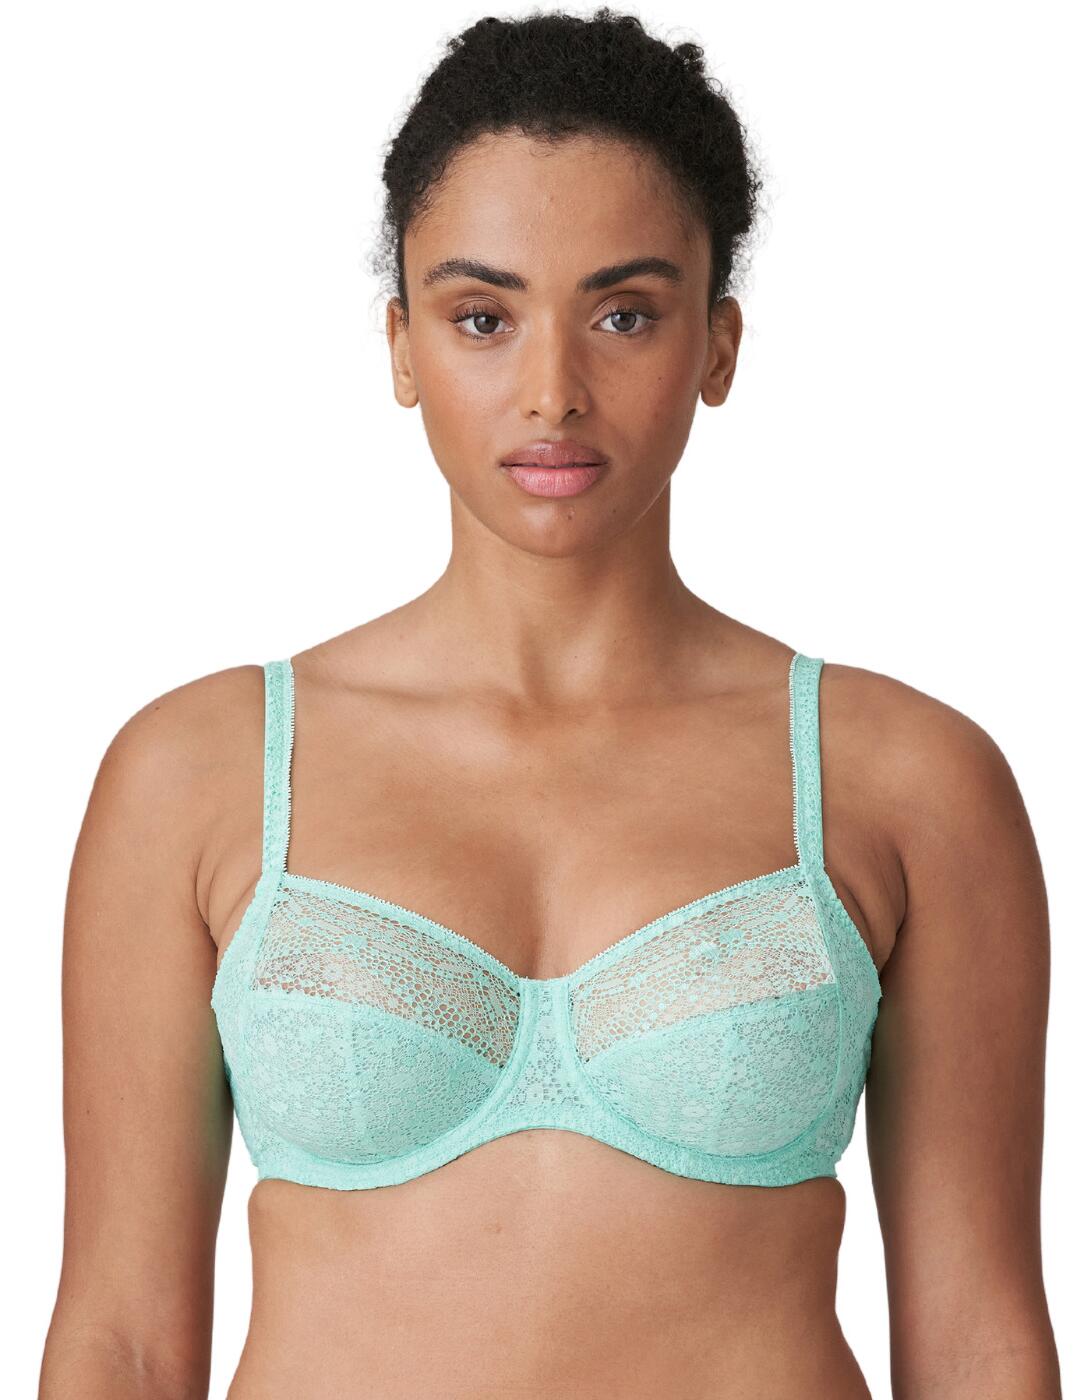 Panache Penny Full Cup Multi Part Cup Bra (9471) 32H/Heather